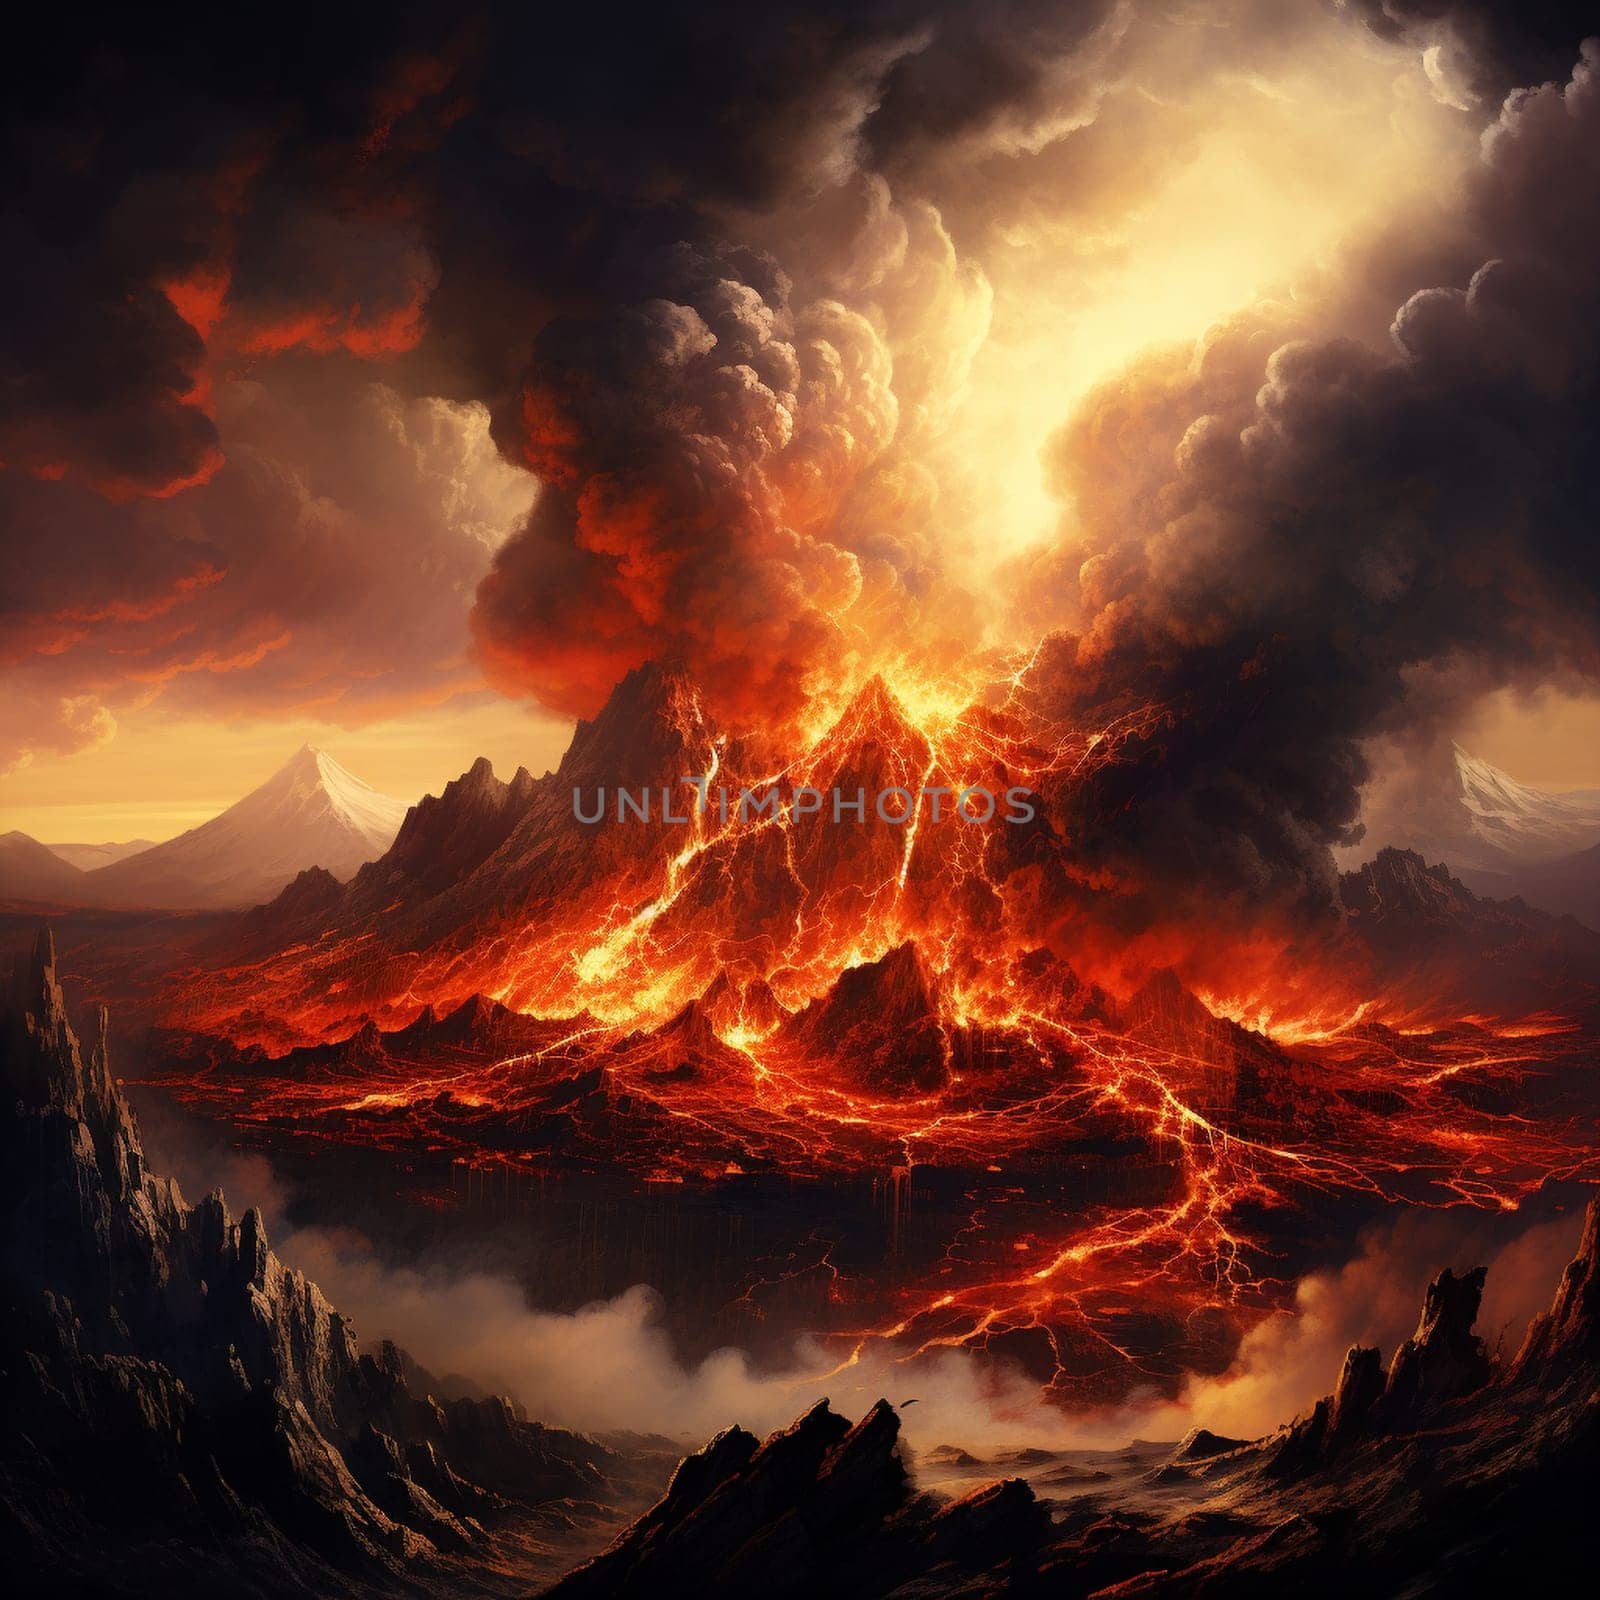 Witness the destructive power and mesmerizing beauty of a volcanic eruption in this semi-realistic image reminiscent of traditional oil paintings. As dusk sets in, a massive volcanic mountain dominates the scene, shrouded in billowing smoke and ash. Molten lava surges from the crater, cascading down the slopes and converging into a nearby body of water, creating a fiery spectacle of swirling red and orange hues. The surrounding landscape is bathed in an ethereal light as the eruption engulfs the horizon. In the foreground, a group of onlookers stands at a safe distance, captivated by the terrifying and awe-inspiring forces of nature.